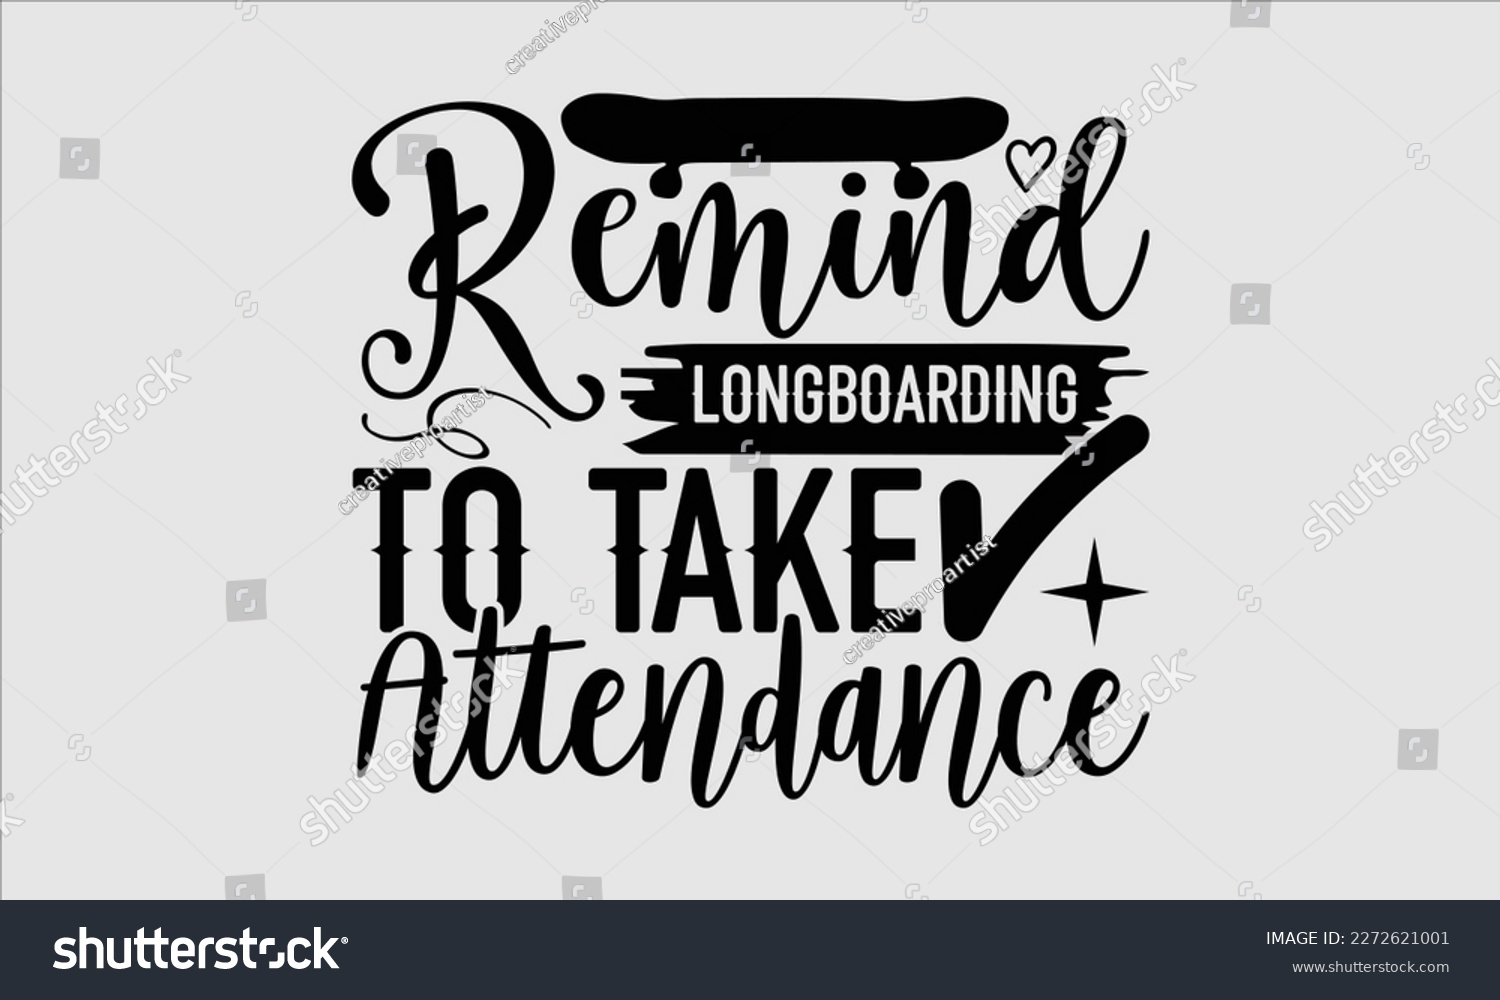 SVG of Remind longboarding to take attendance- Longboarding T- shirt Design, Hand drawn lettering phrase, Illustration for prints on t-shirts and bags, posters, funny eps files, svg cricut svg